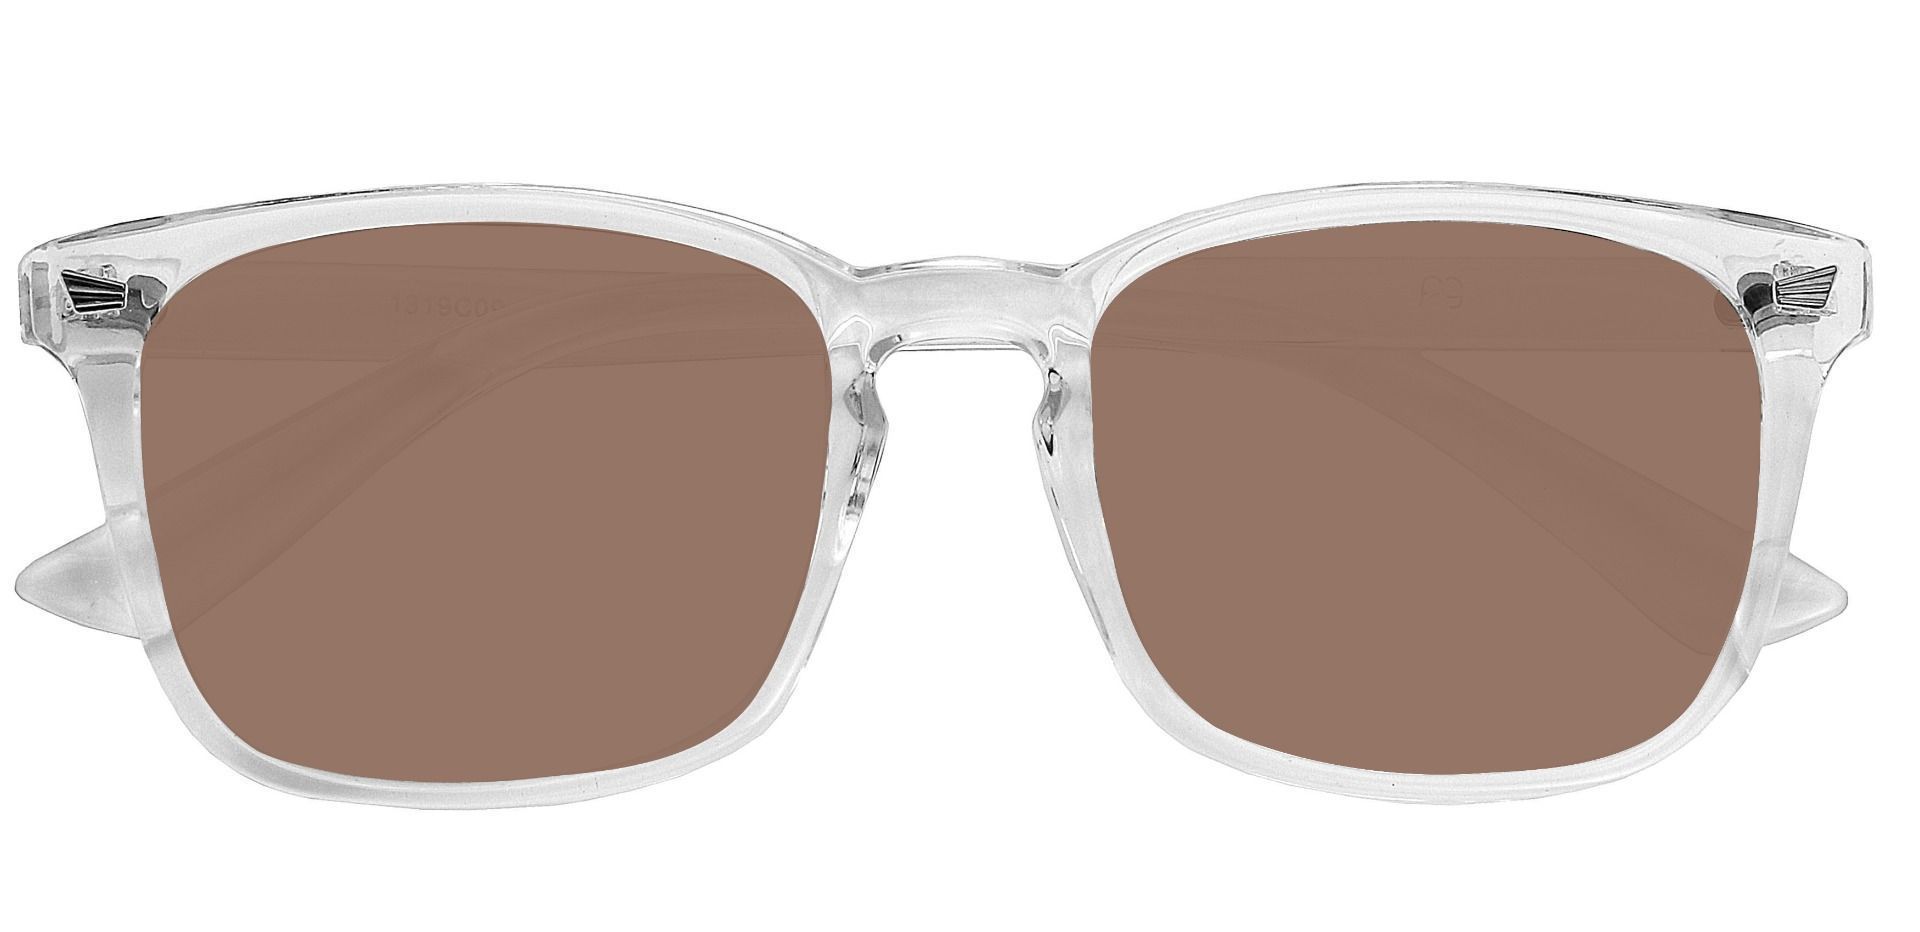 Rogan Square Non-Rx Sunglasses - Clear Frame With Brown Lenses